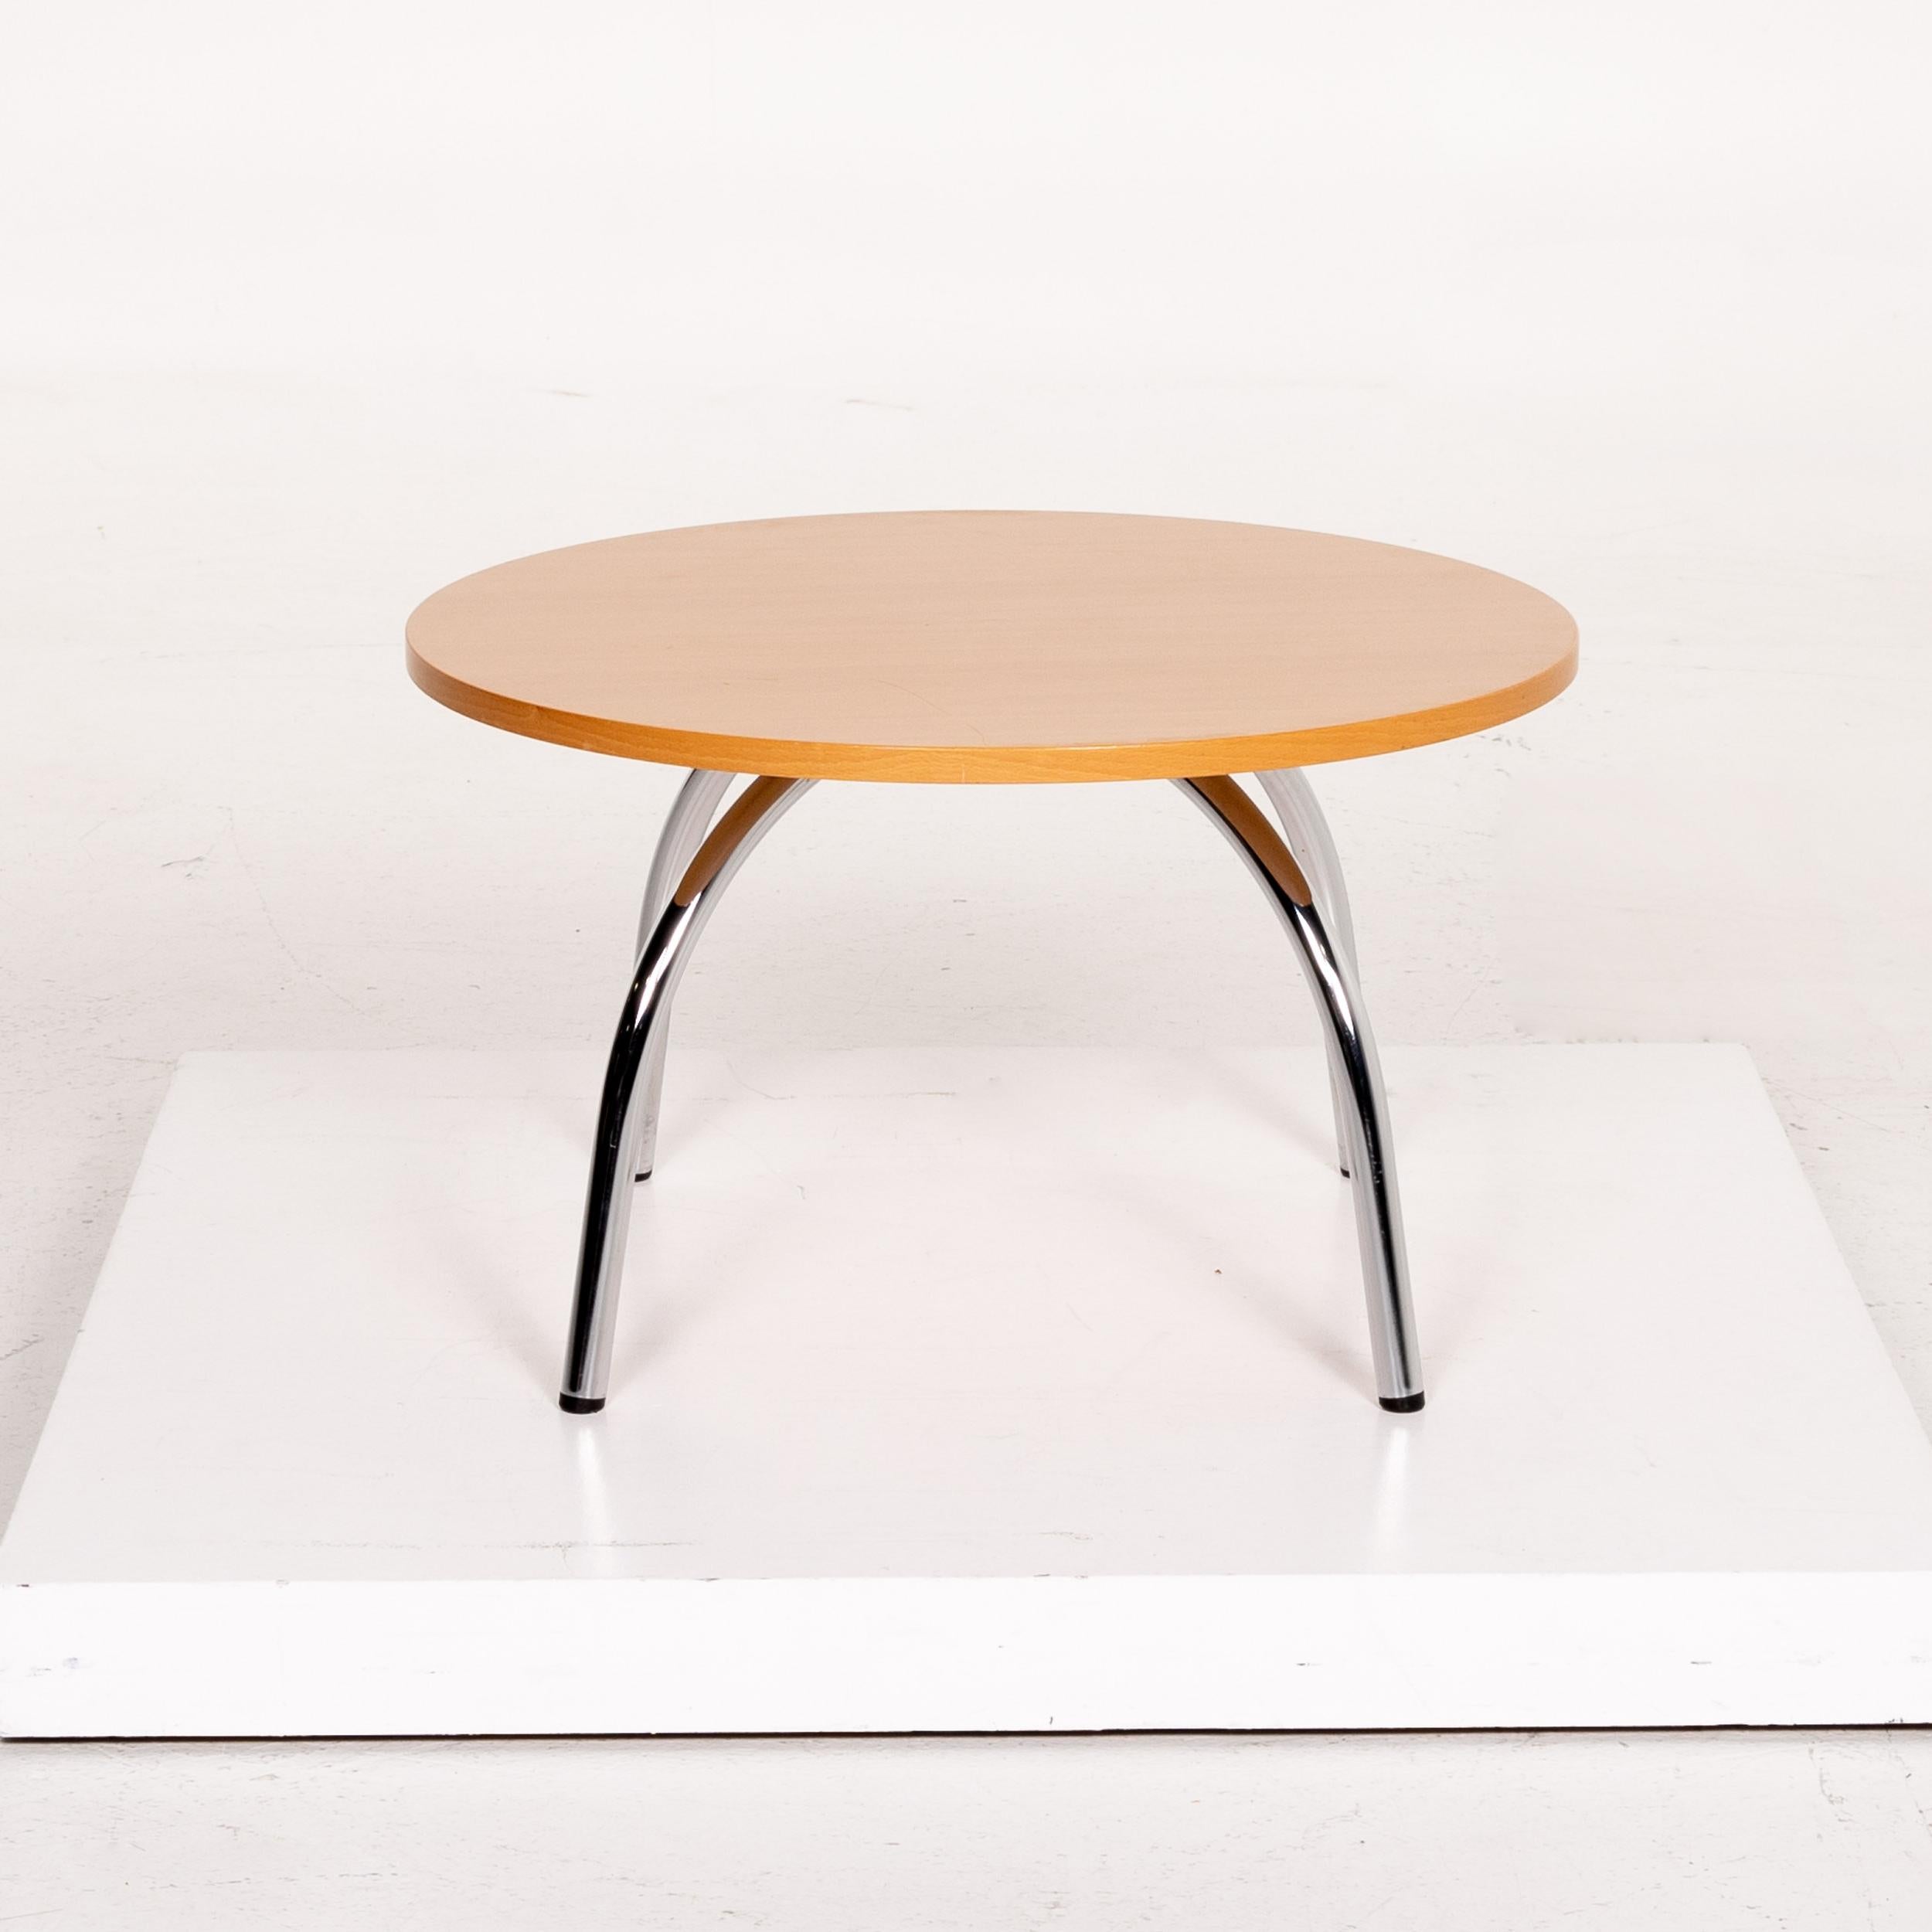 German Walter Knoll Wooden Coffee Table Round Table For Sale